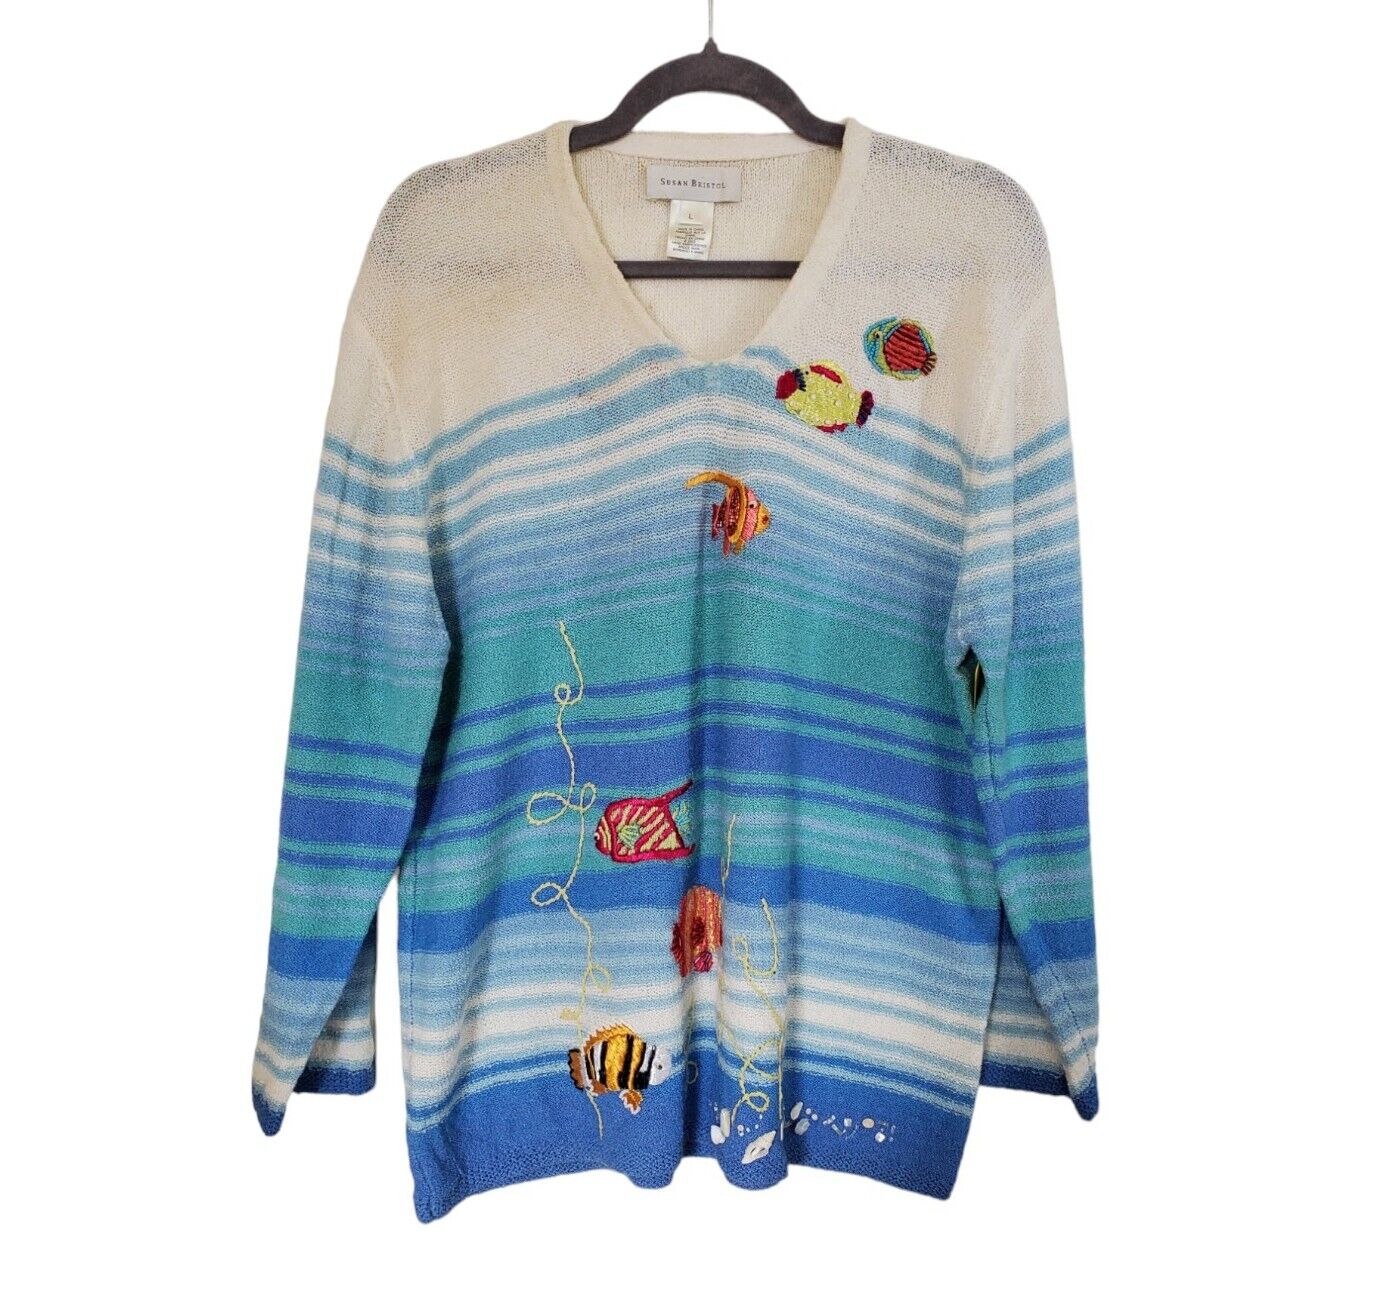 Susan Bristol Fish Beaded Hand Embroidered Shells Colorful V-Neck Sweater, Large